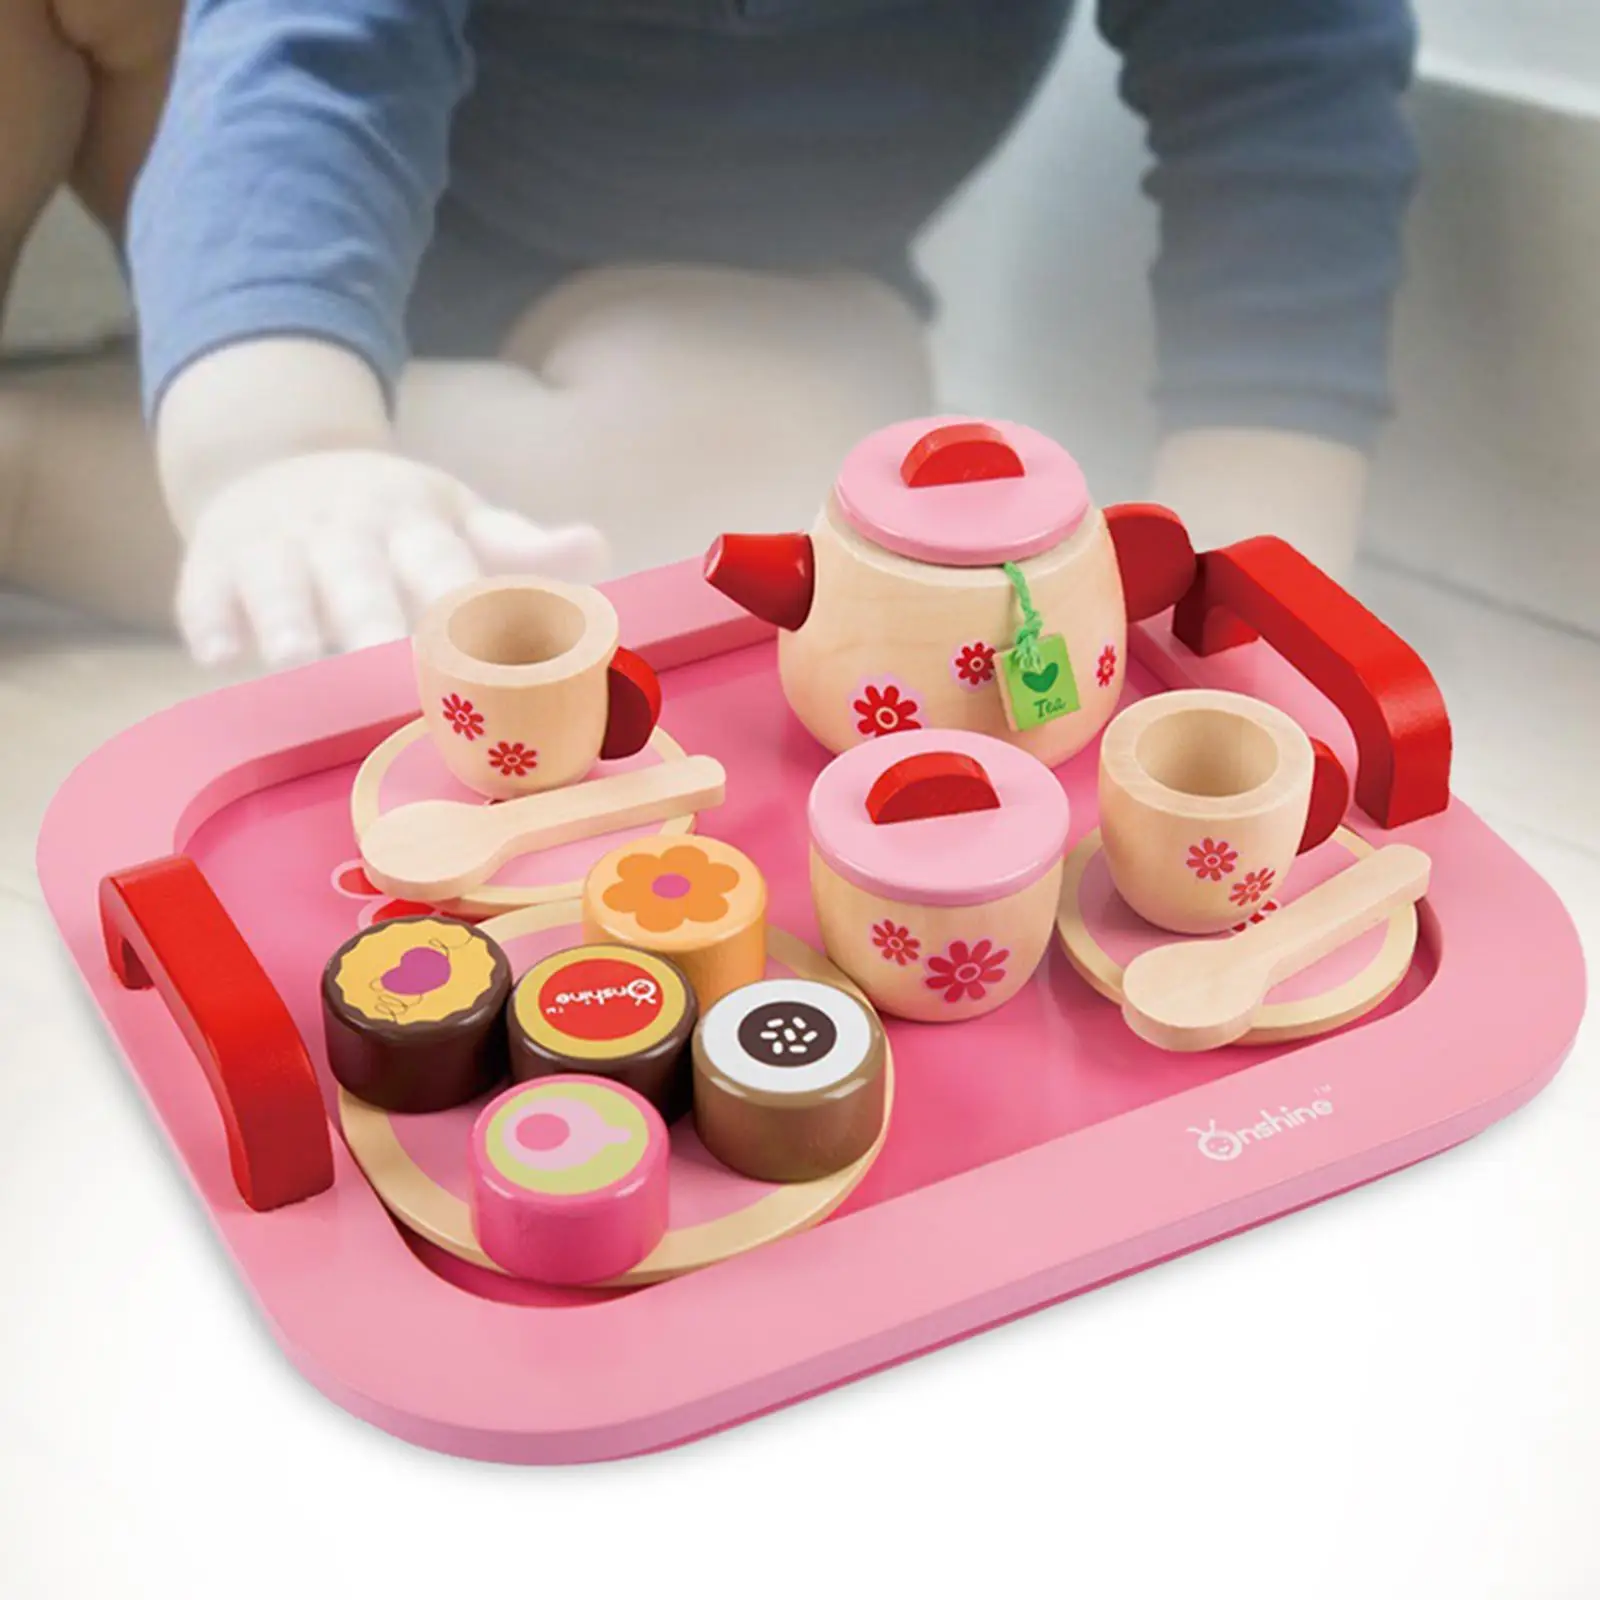 Wooden Pretend Play Tea Party Set Play Tea Party Accessories for Toddler 3+